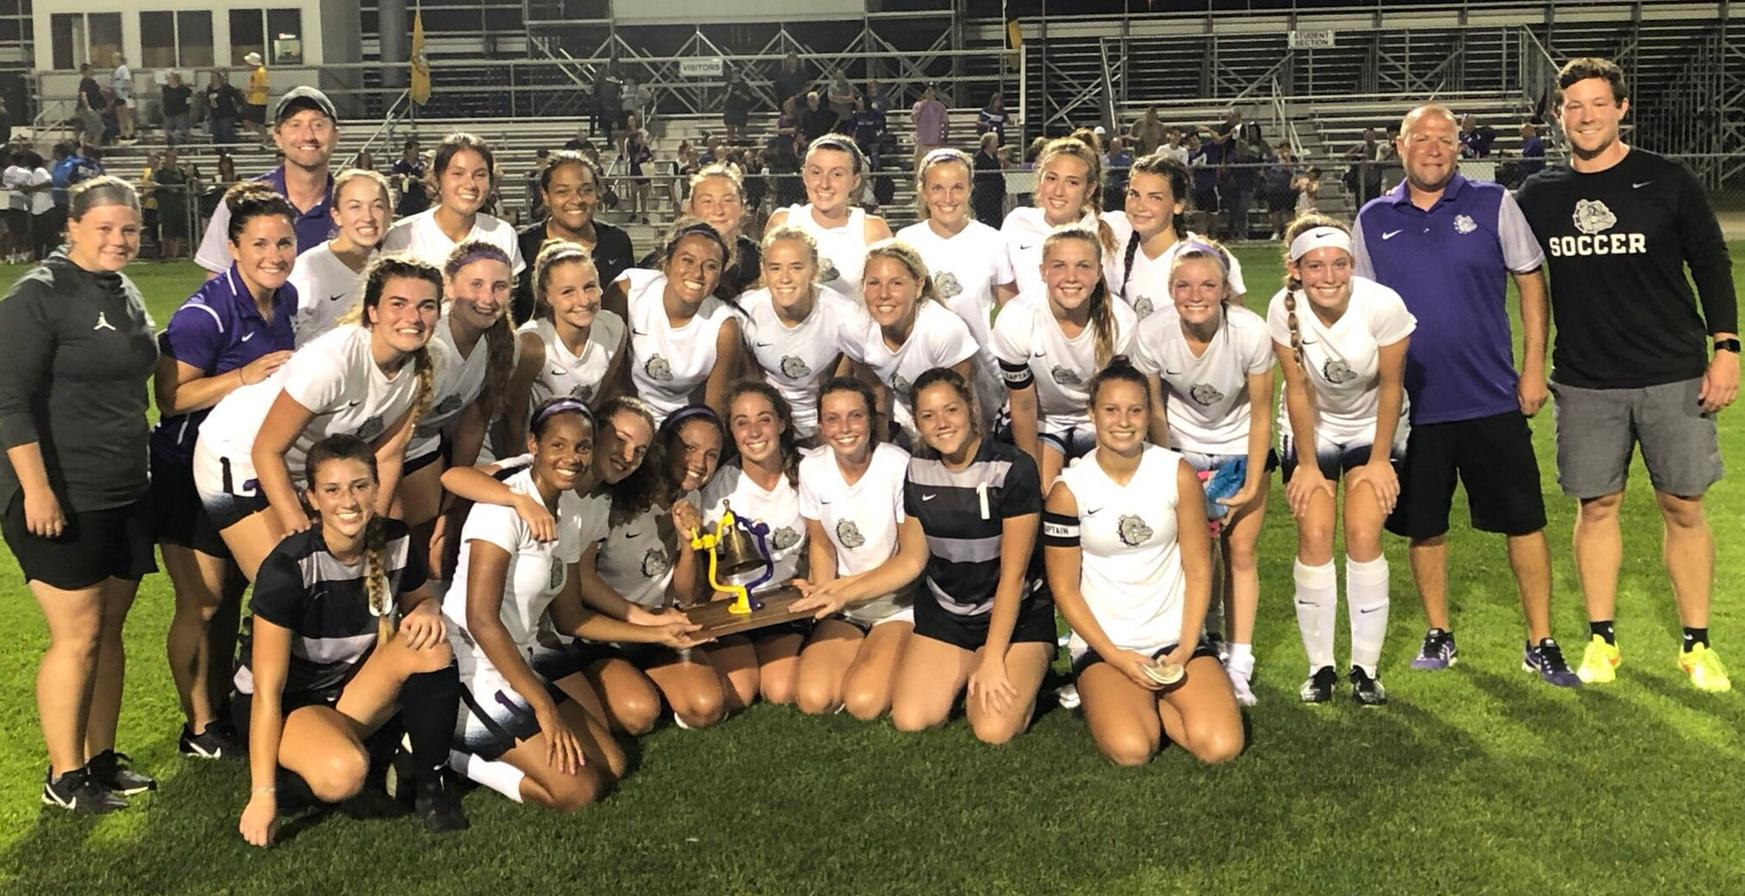 Hendrickson's 80th minute goal gives @bhsdogs_gsoccer Rotary Bell win